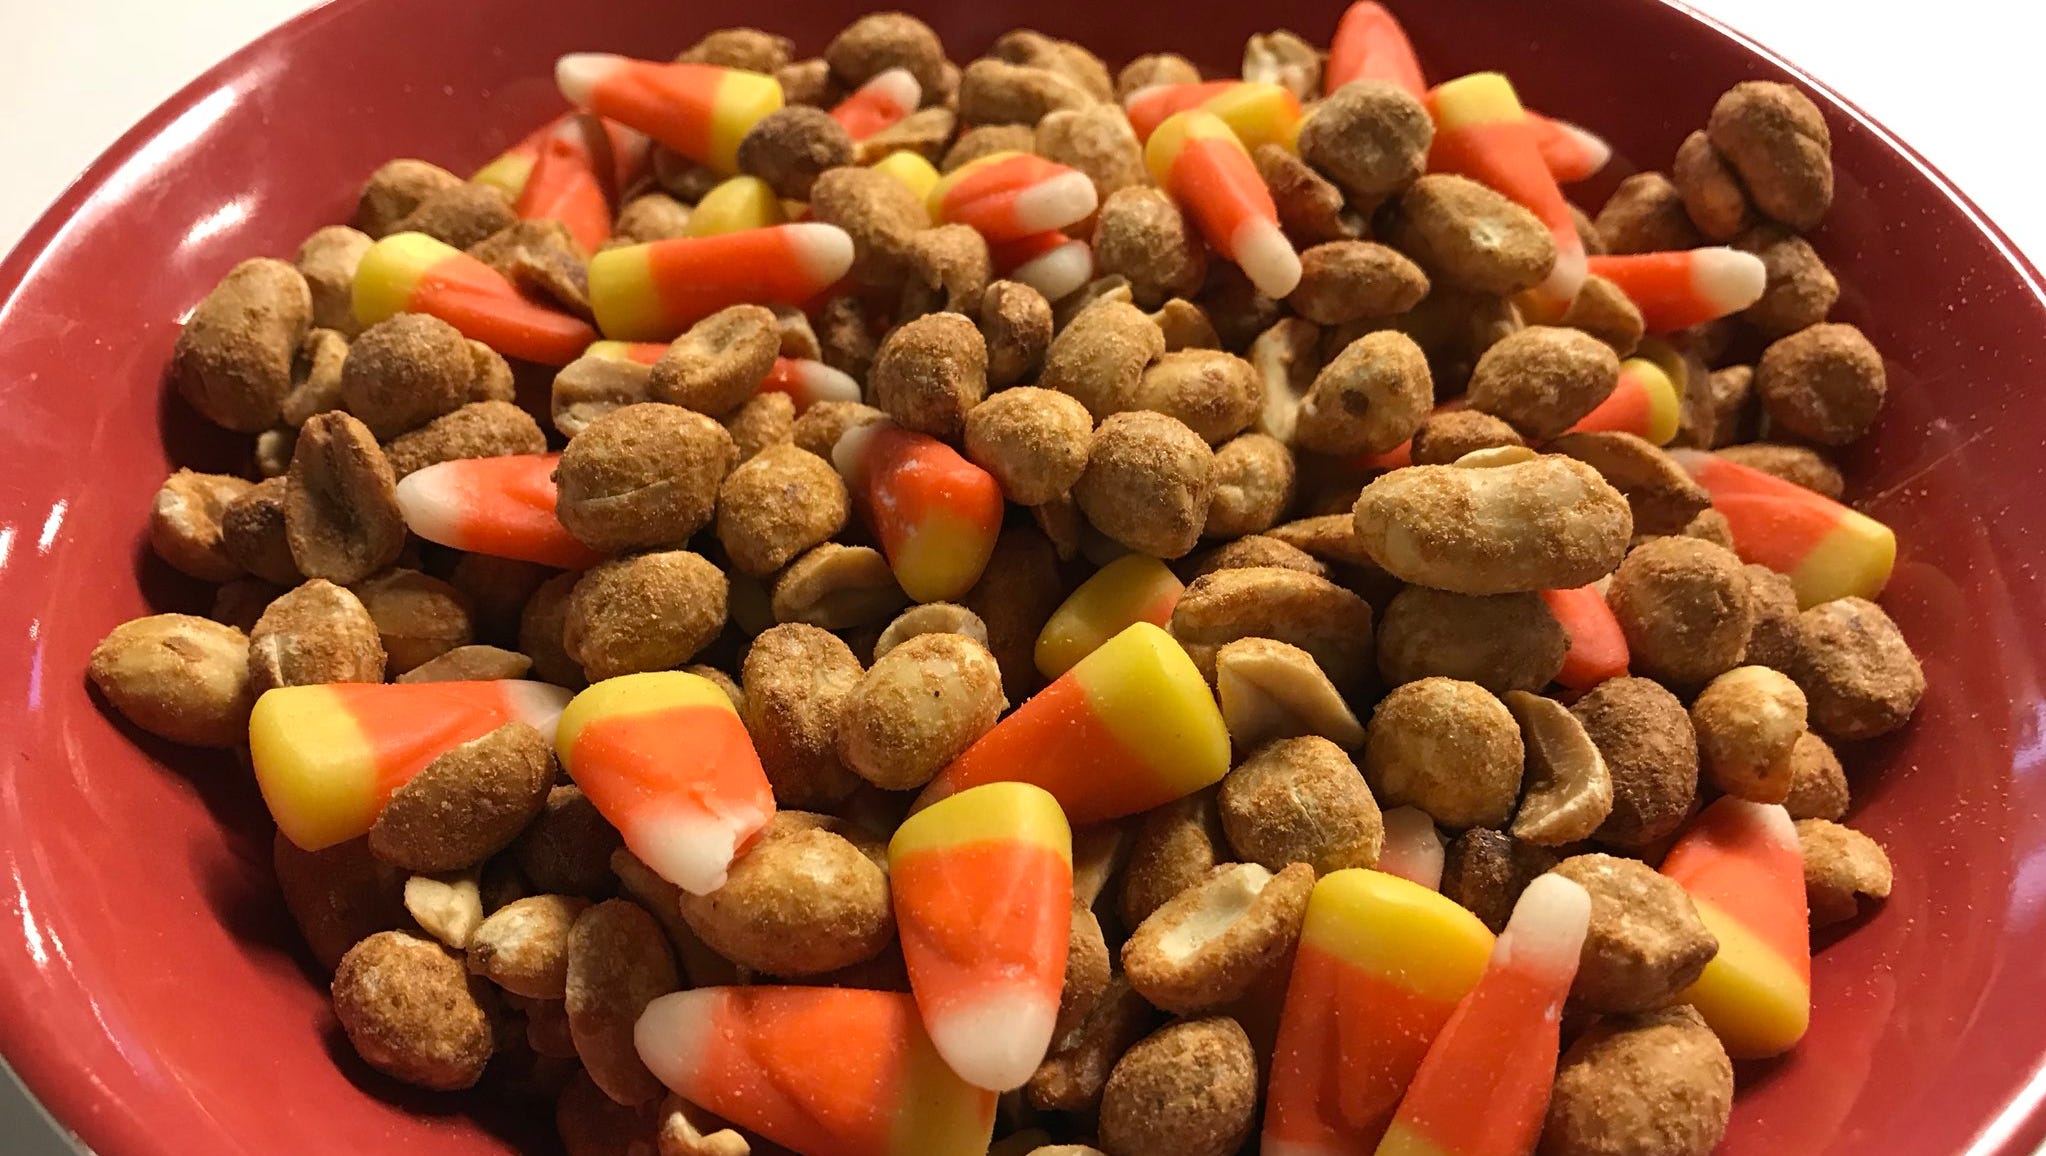 What Candy Corn Is Gluten Free